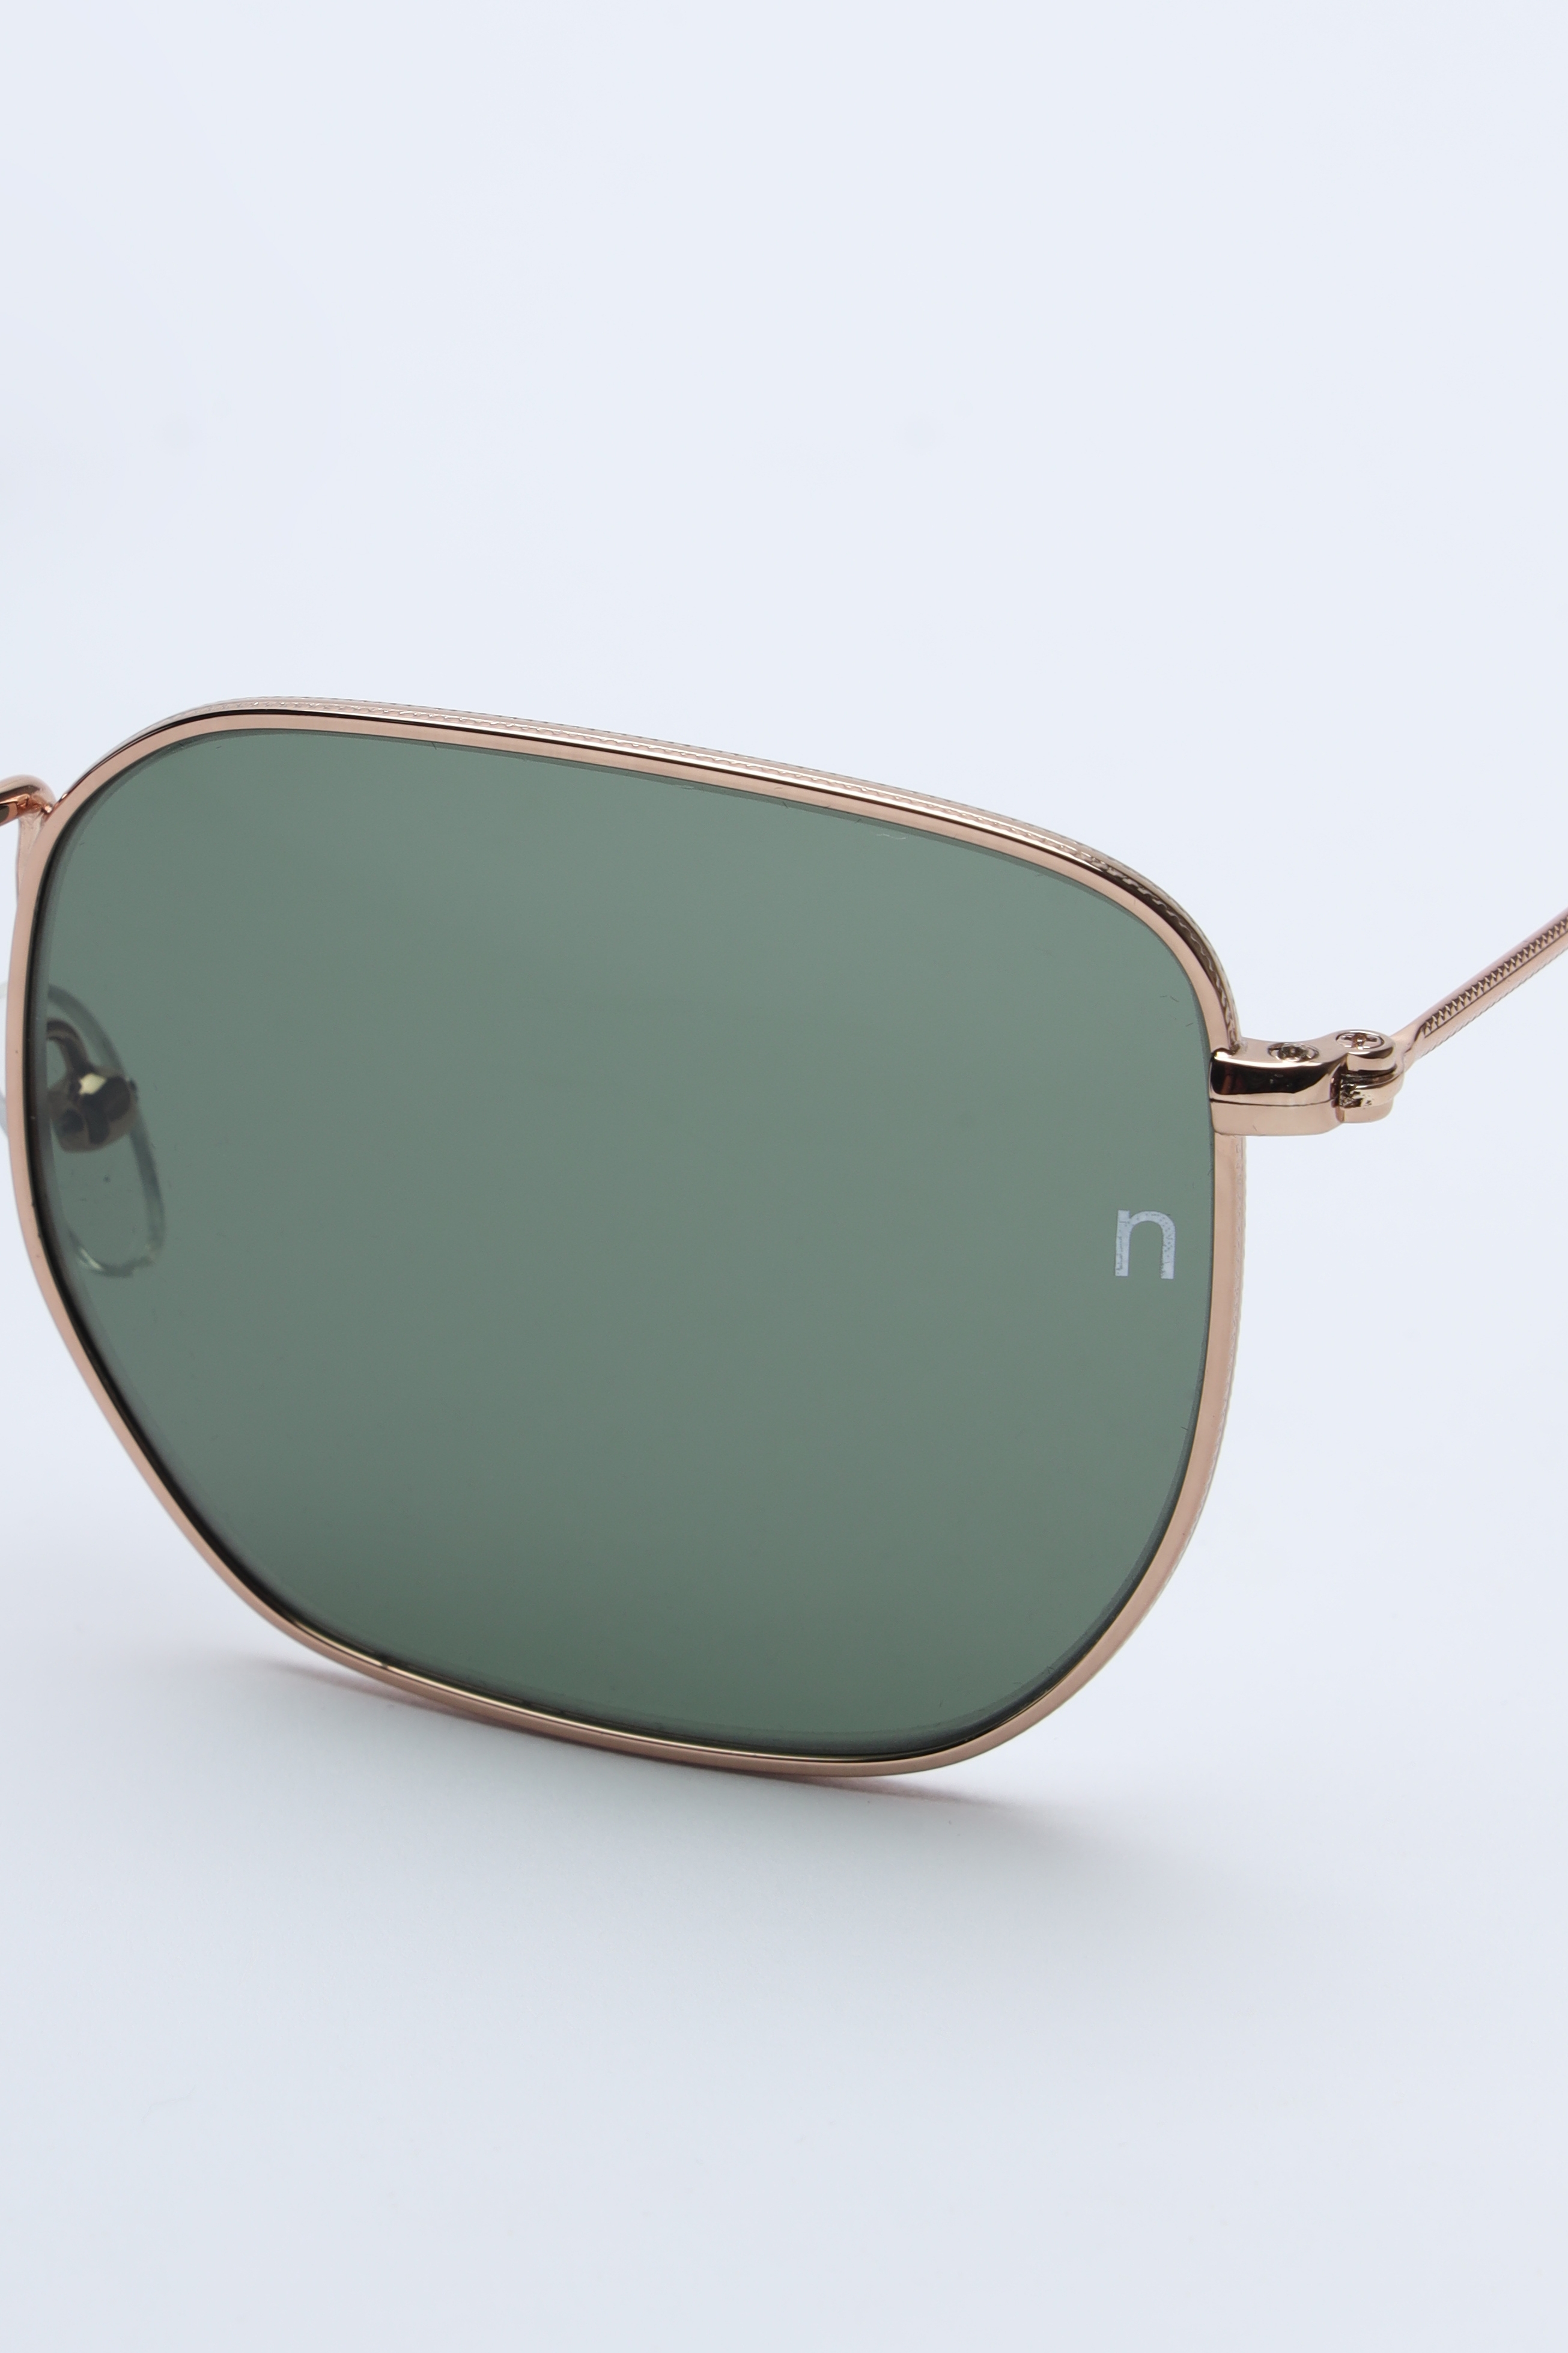 Noggah | Noggah Stainless Steel Gold Frame with Green Glass UV Protection Lens  Large Size Unisex Sunglasses  2